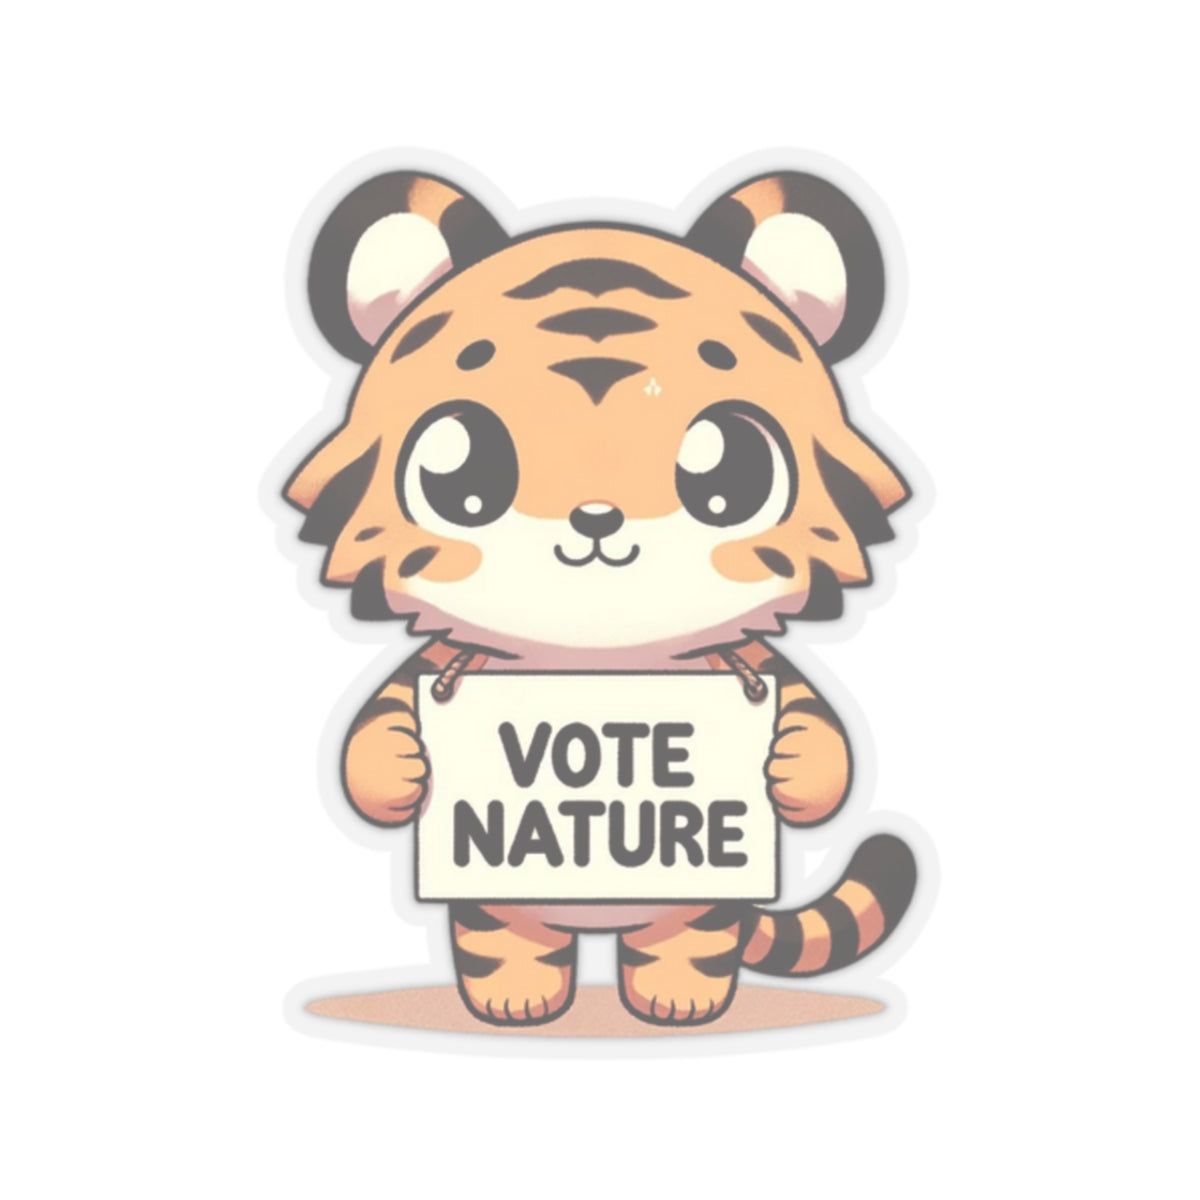 Inspirational Cute Tiger Statement vinyl Sticker: Vote Nature! for laptop, kindle, phone, ipad, instrument case, notebook, mood board